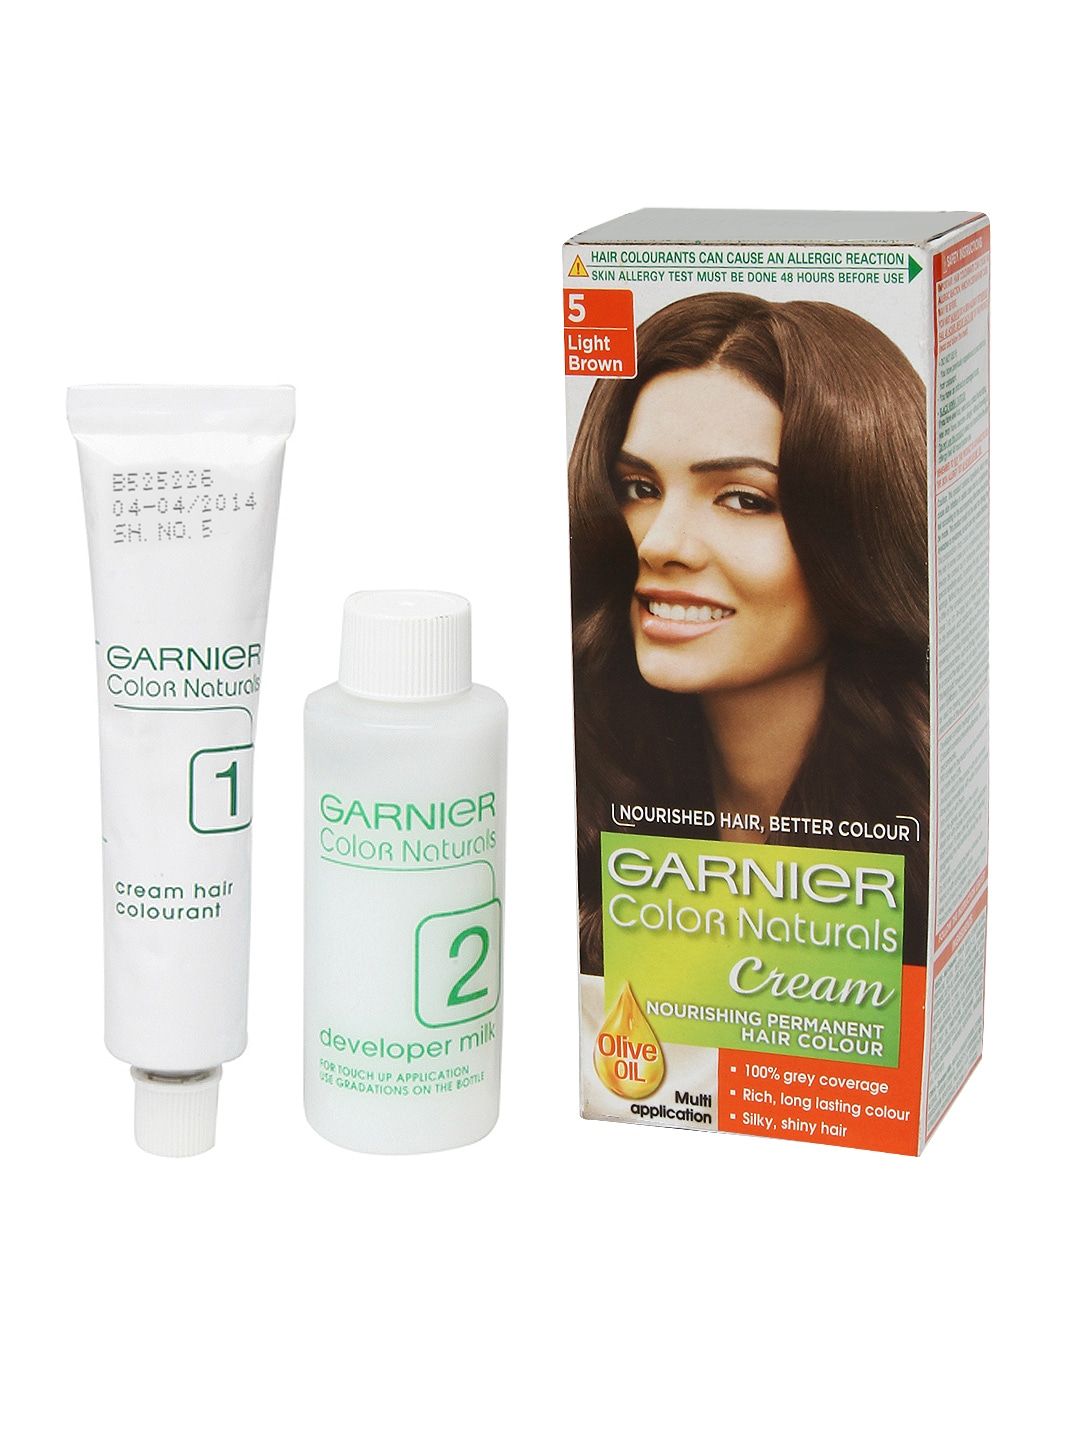 Garnier Color Naturals Creme Light Brown Hair Color 5 70 ml + 60 g Price in India